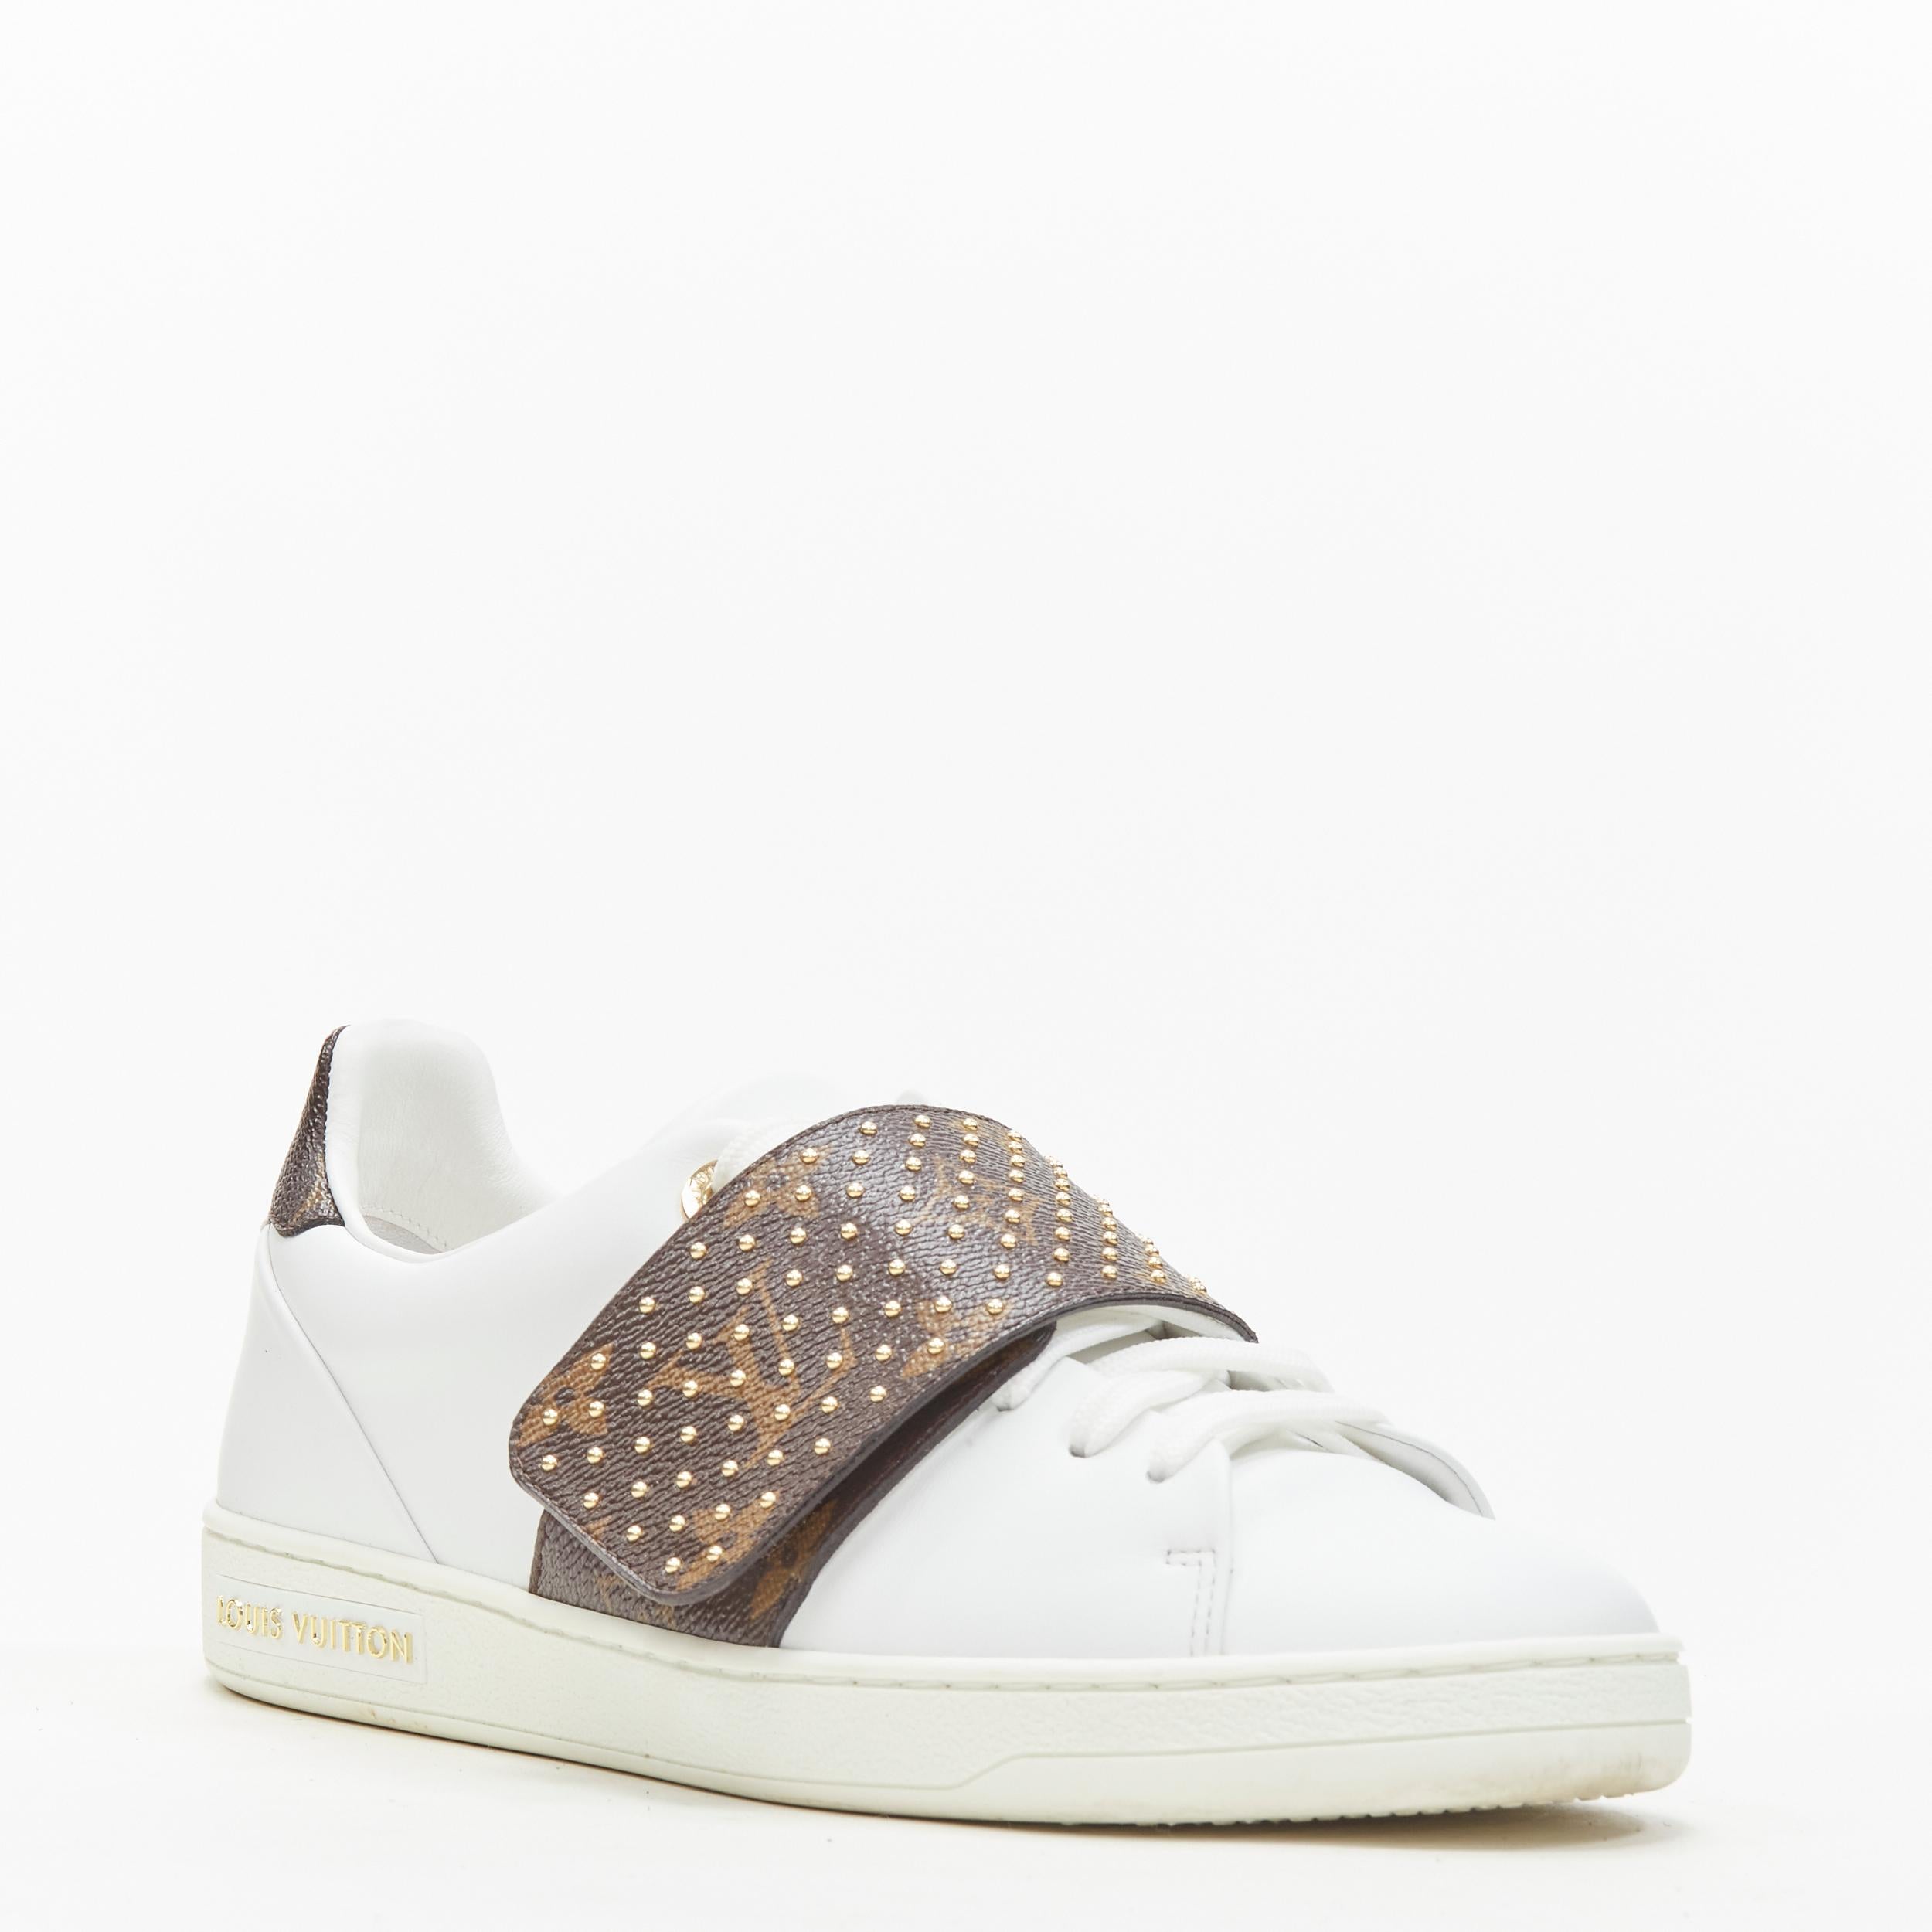 LOUIS VUITTON Front Row brown LV monogram gold stud white leather sneaker EU36 
Reference: ANWU/A00341 
Brand: Louis Vuitton 
Collection: Front Row 
Material: Leather 
Color: White. 
Pattern: Solid 
Closure: Magic Tape 
Extra Detail: Magic tape